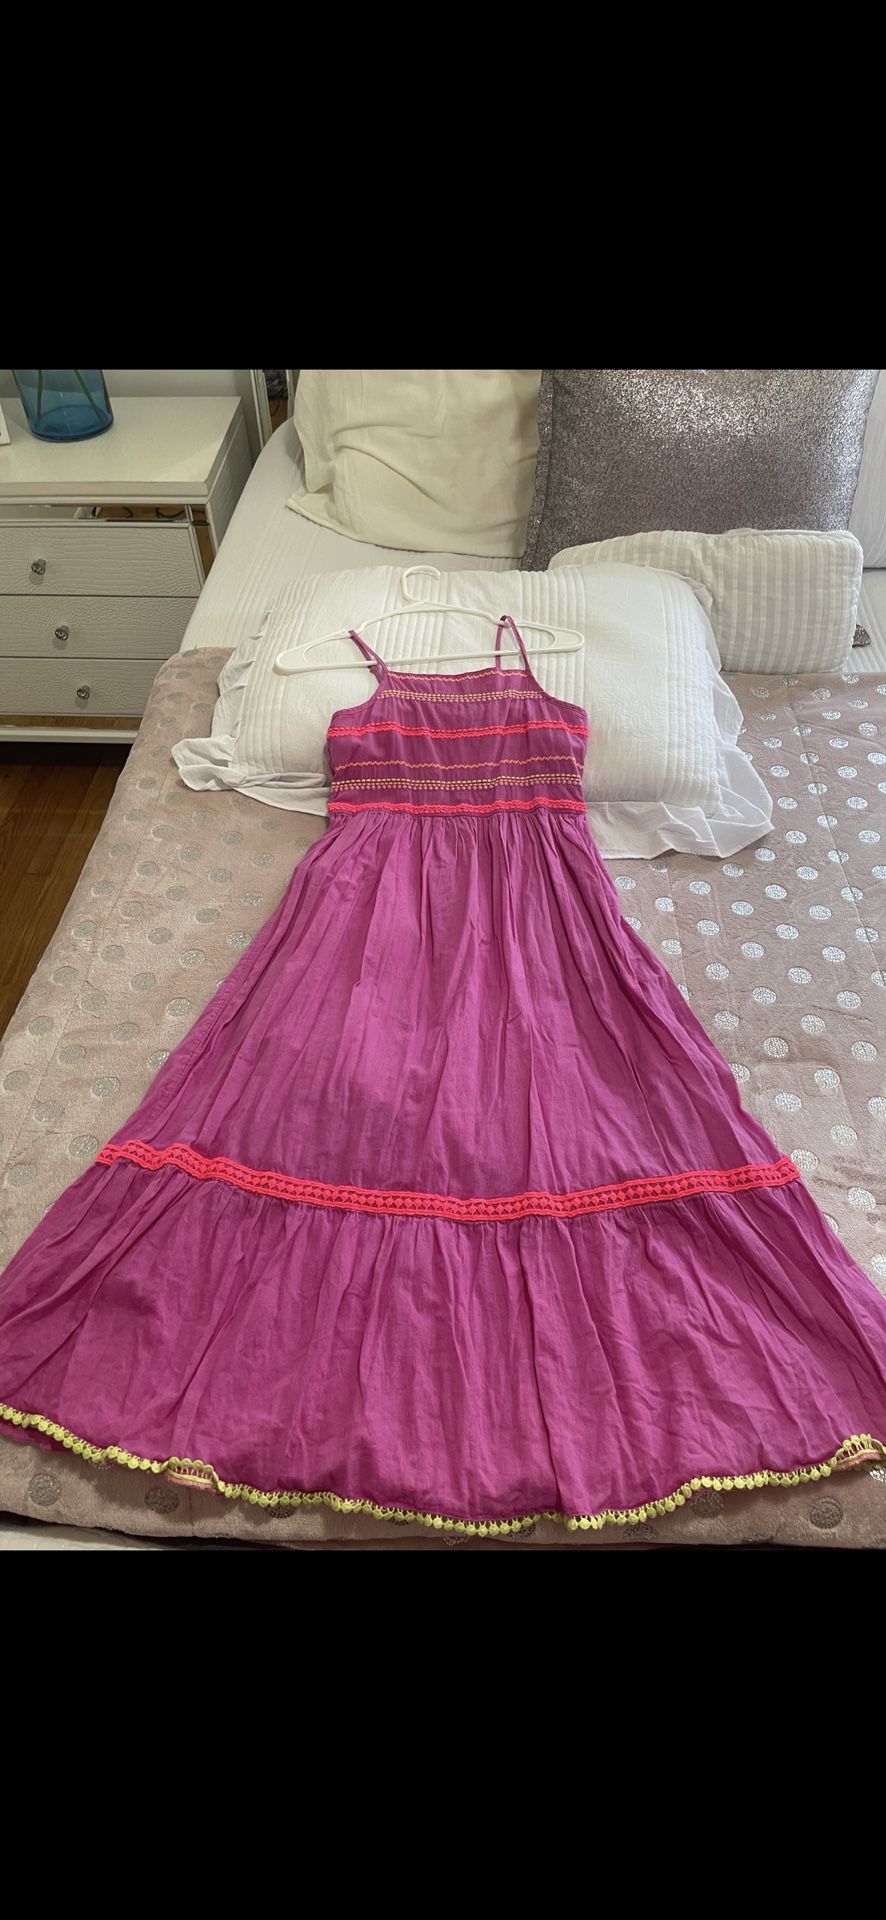 Cat & Jack Maxi Dress 👗 Size 10-12 For Girls, Good Conditions Used Once 